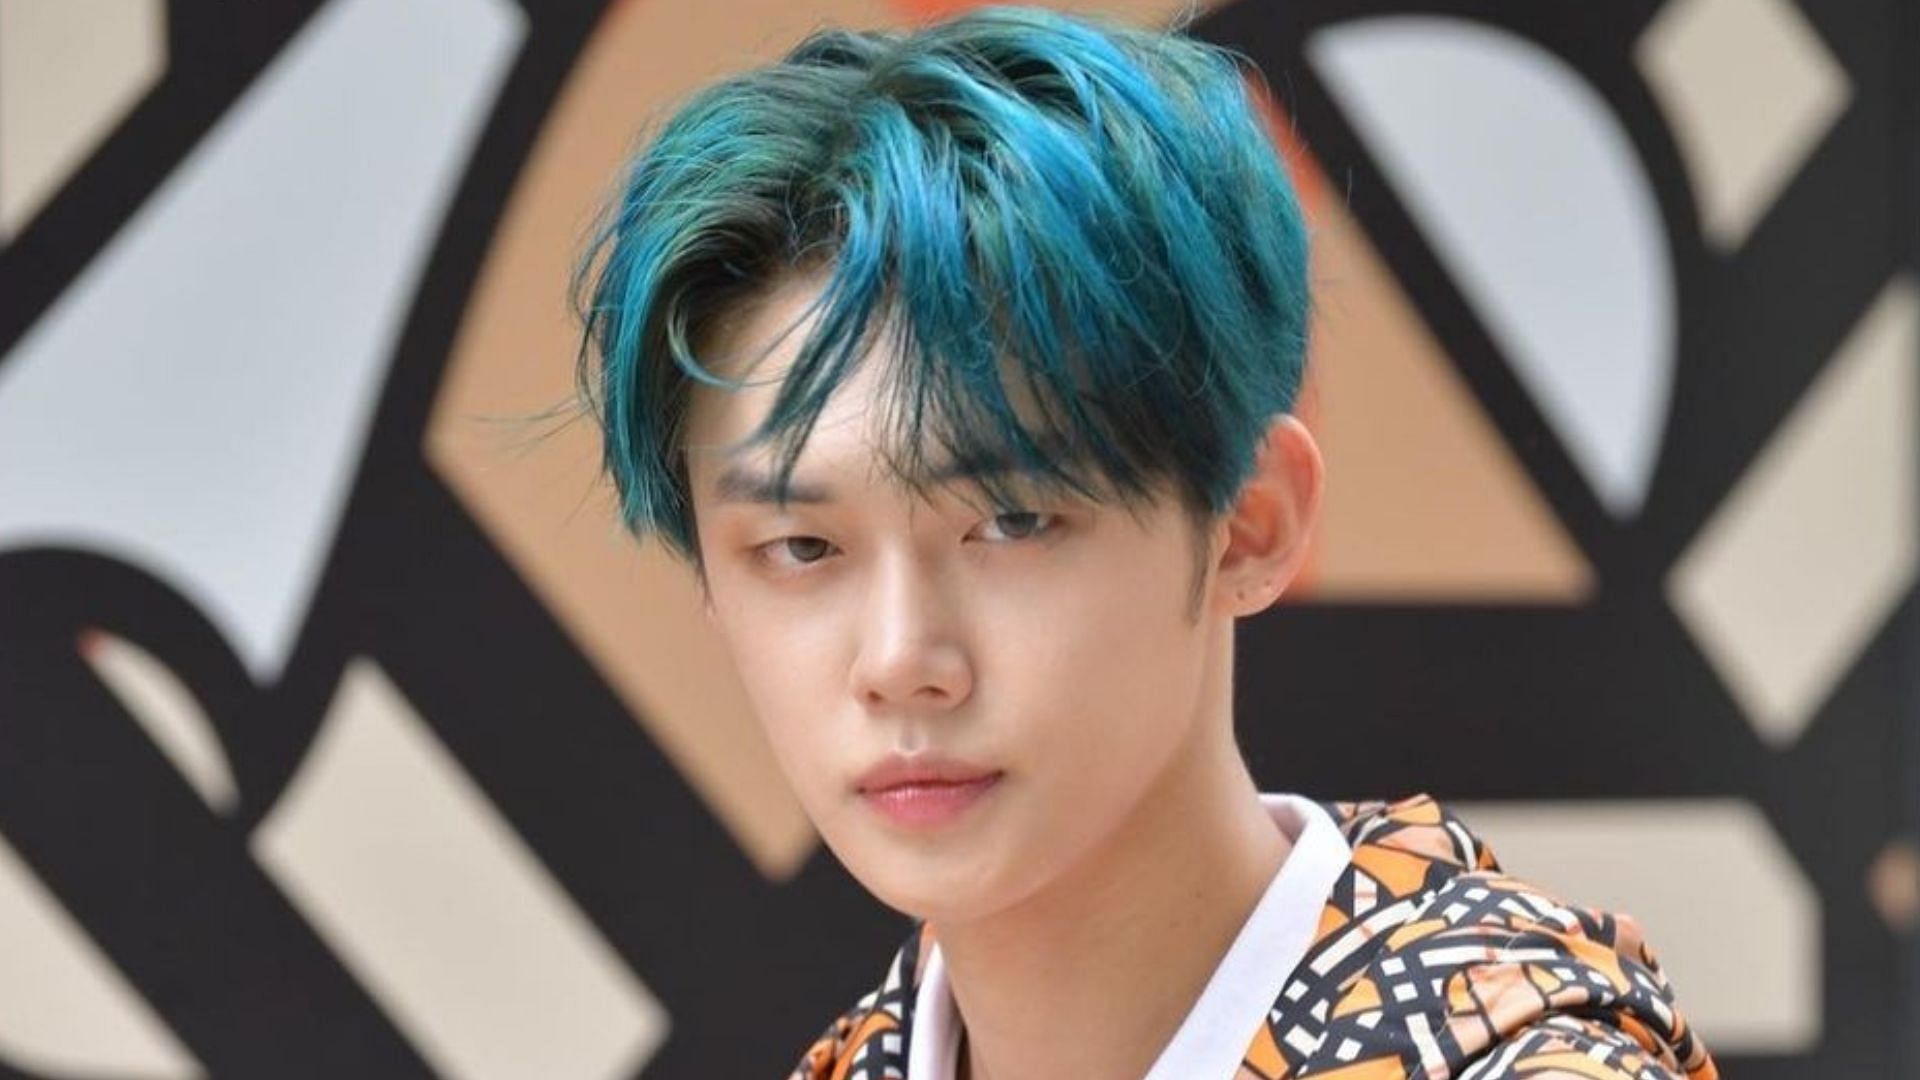 9. "Blue Hair on Guys: Frequently Asked Questions" - wide 8